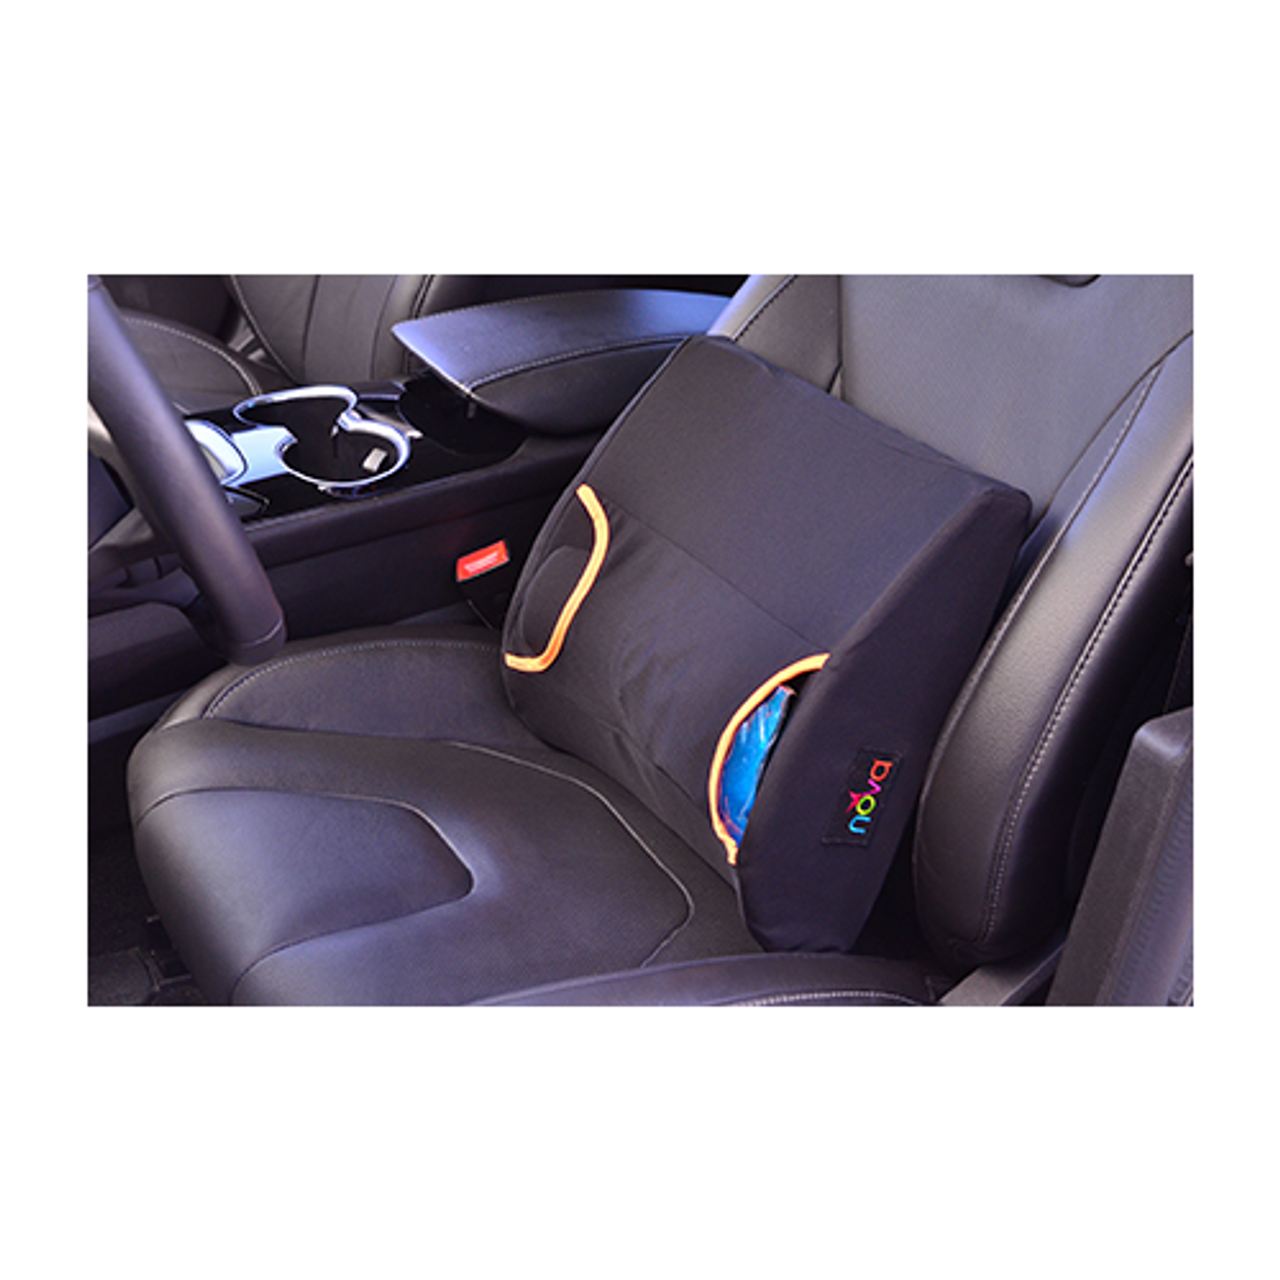 Convoluted Seat/Back Cushion W/ Fleece Cover - Healthquest, Inc.